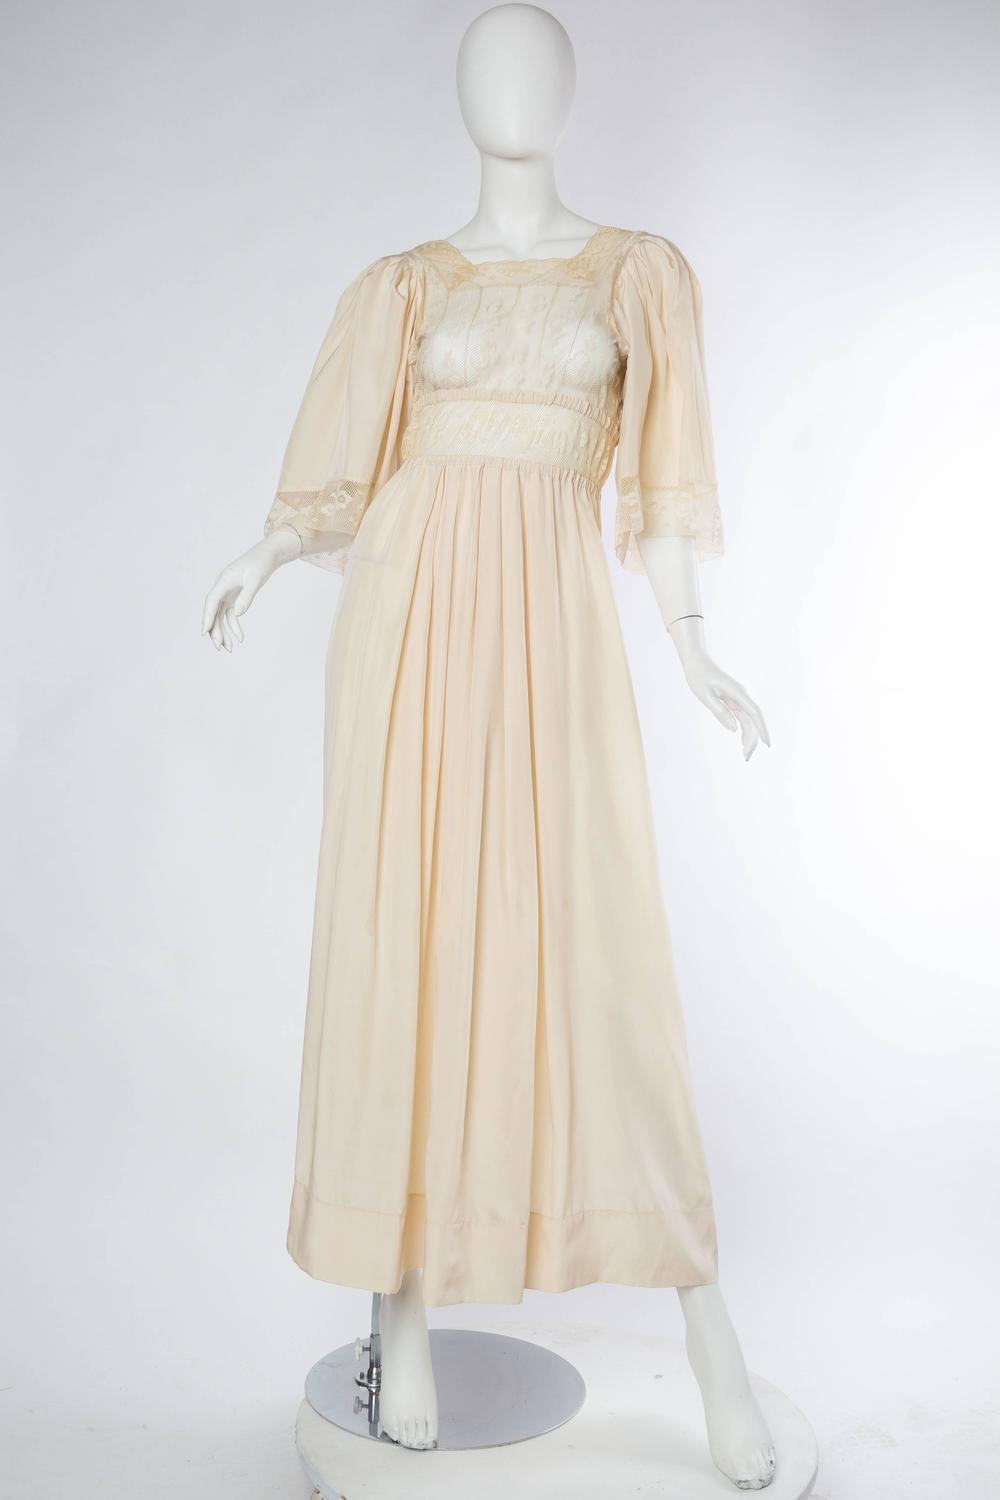 Edwardian Silk and Lace Negligee Dress For Sale at 1stdibs